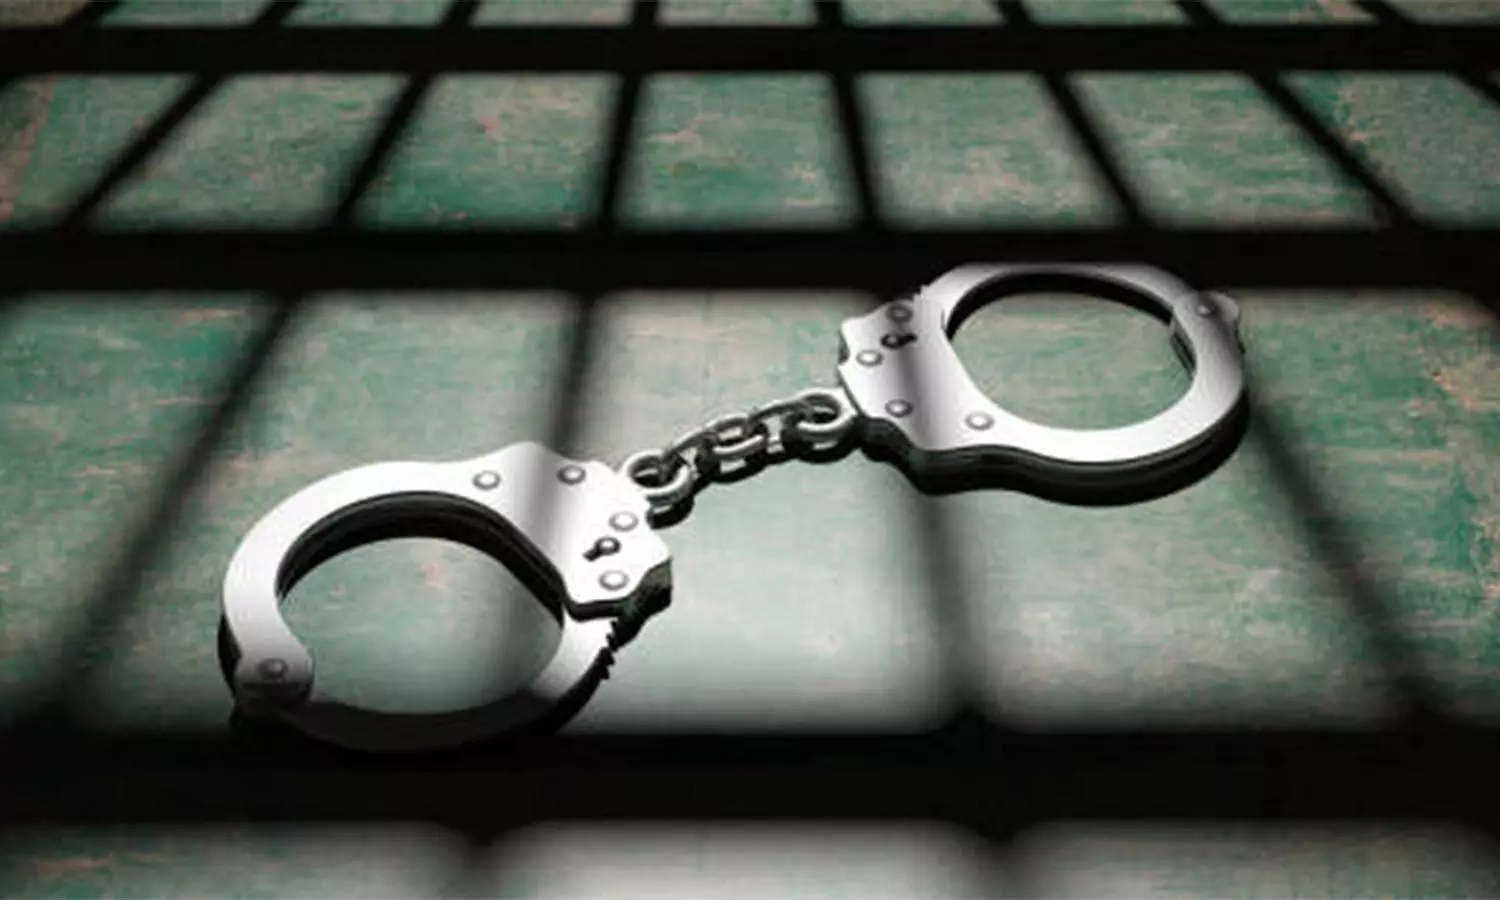 Tenali police arrest 4 for producing fake bail documents to free robbers